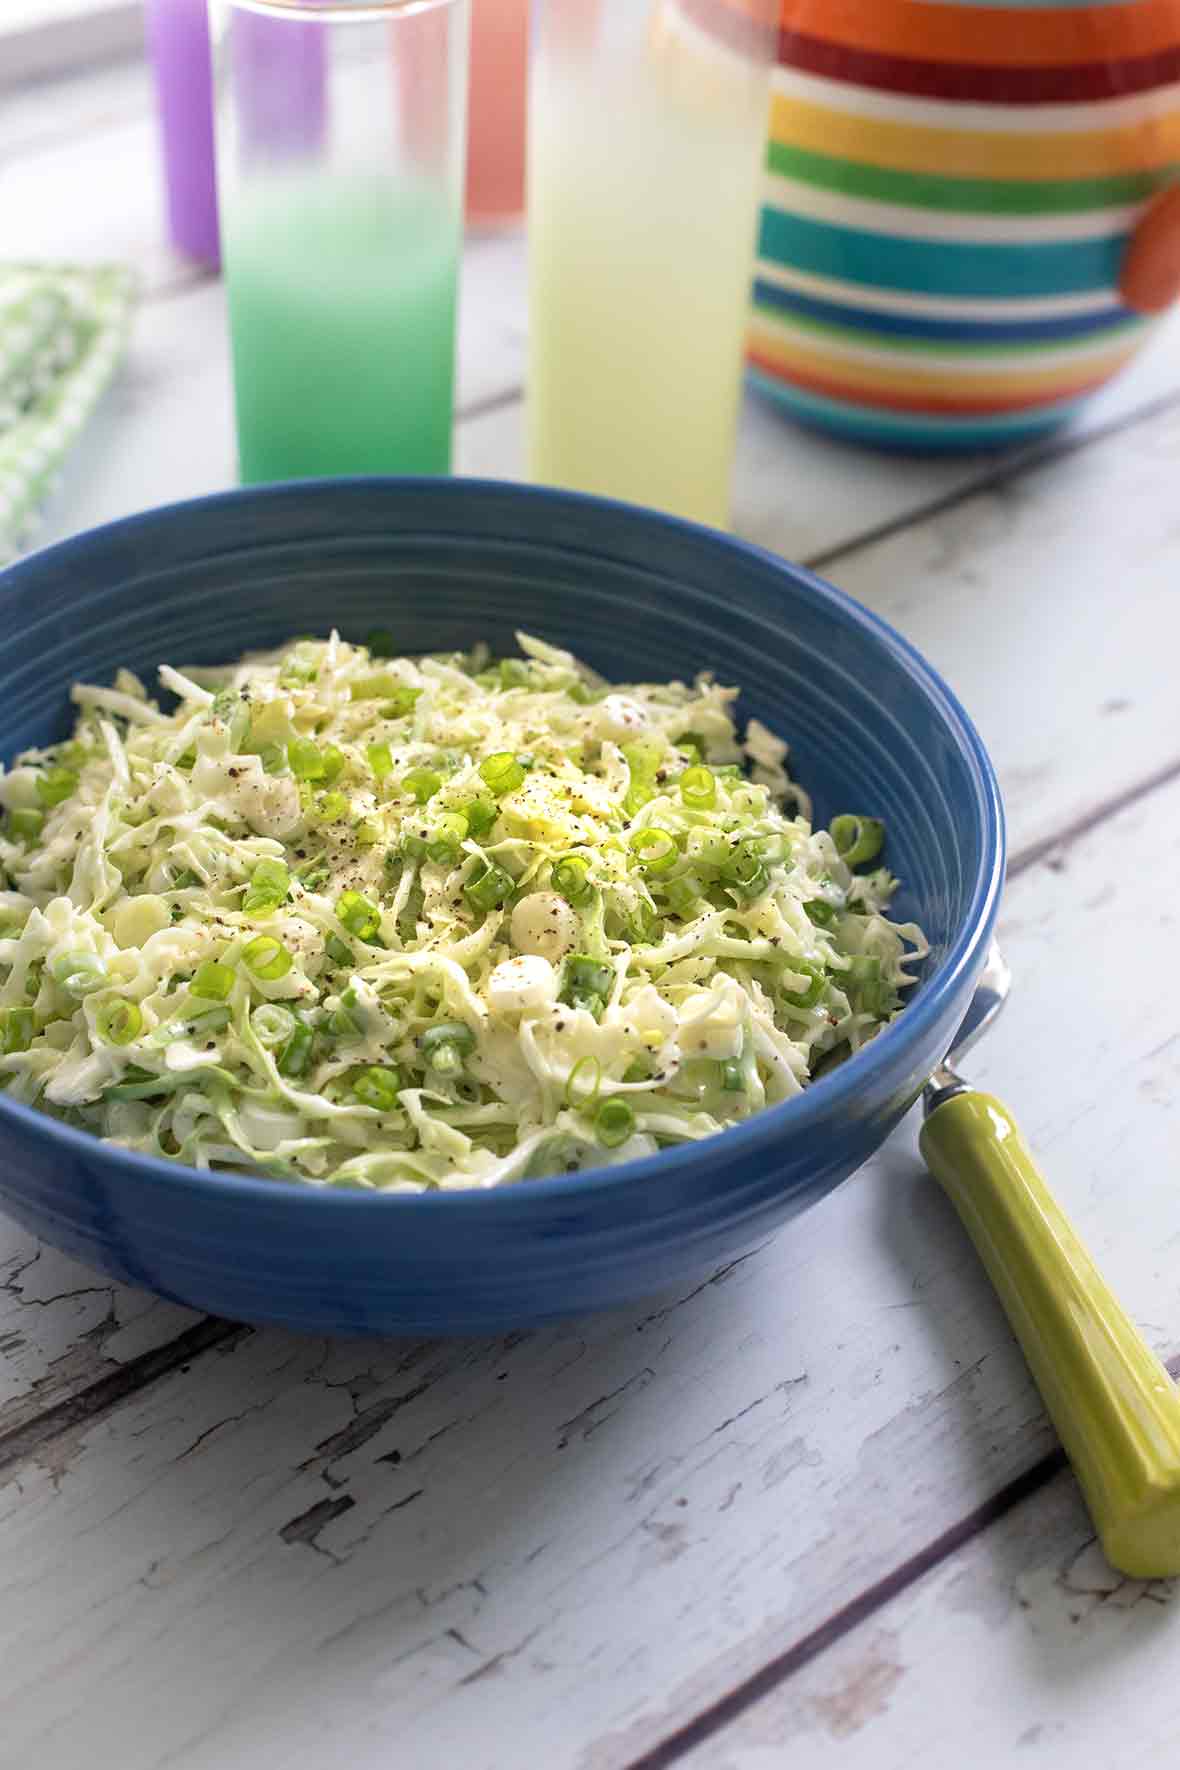 A blue ceramic bowl filled with classic coleslaw.